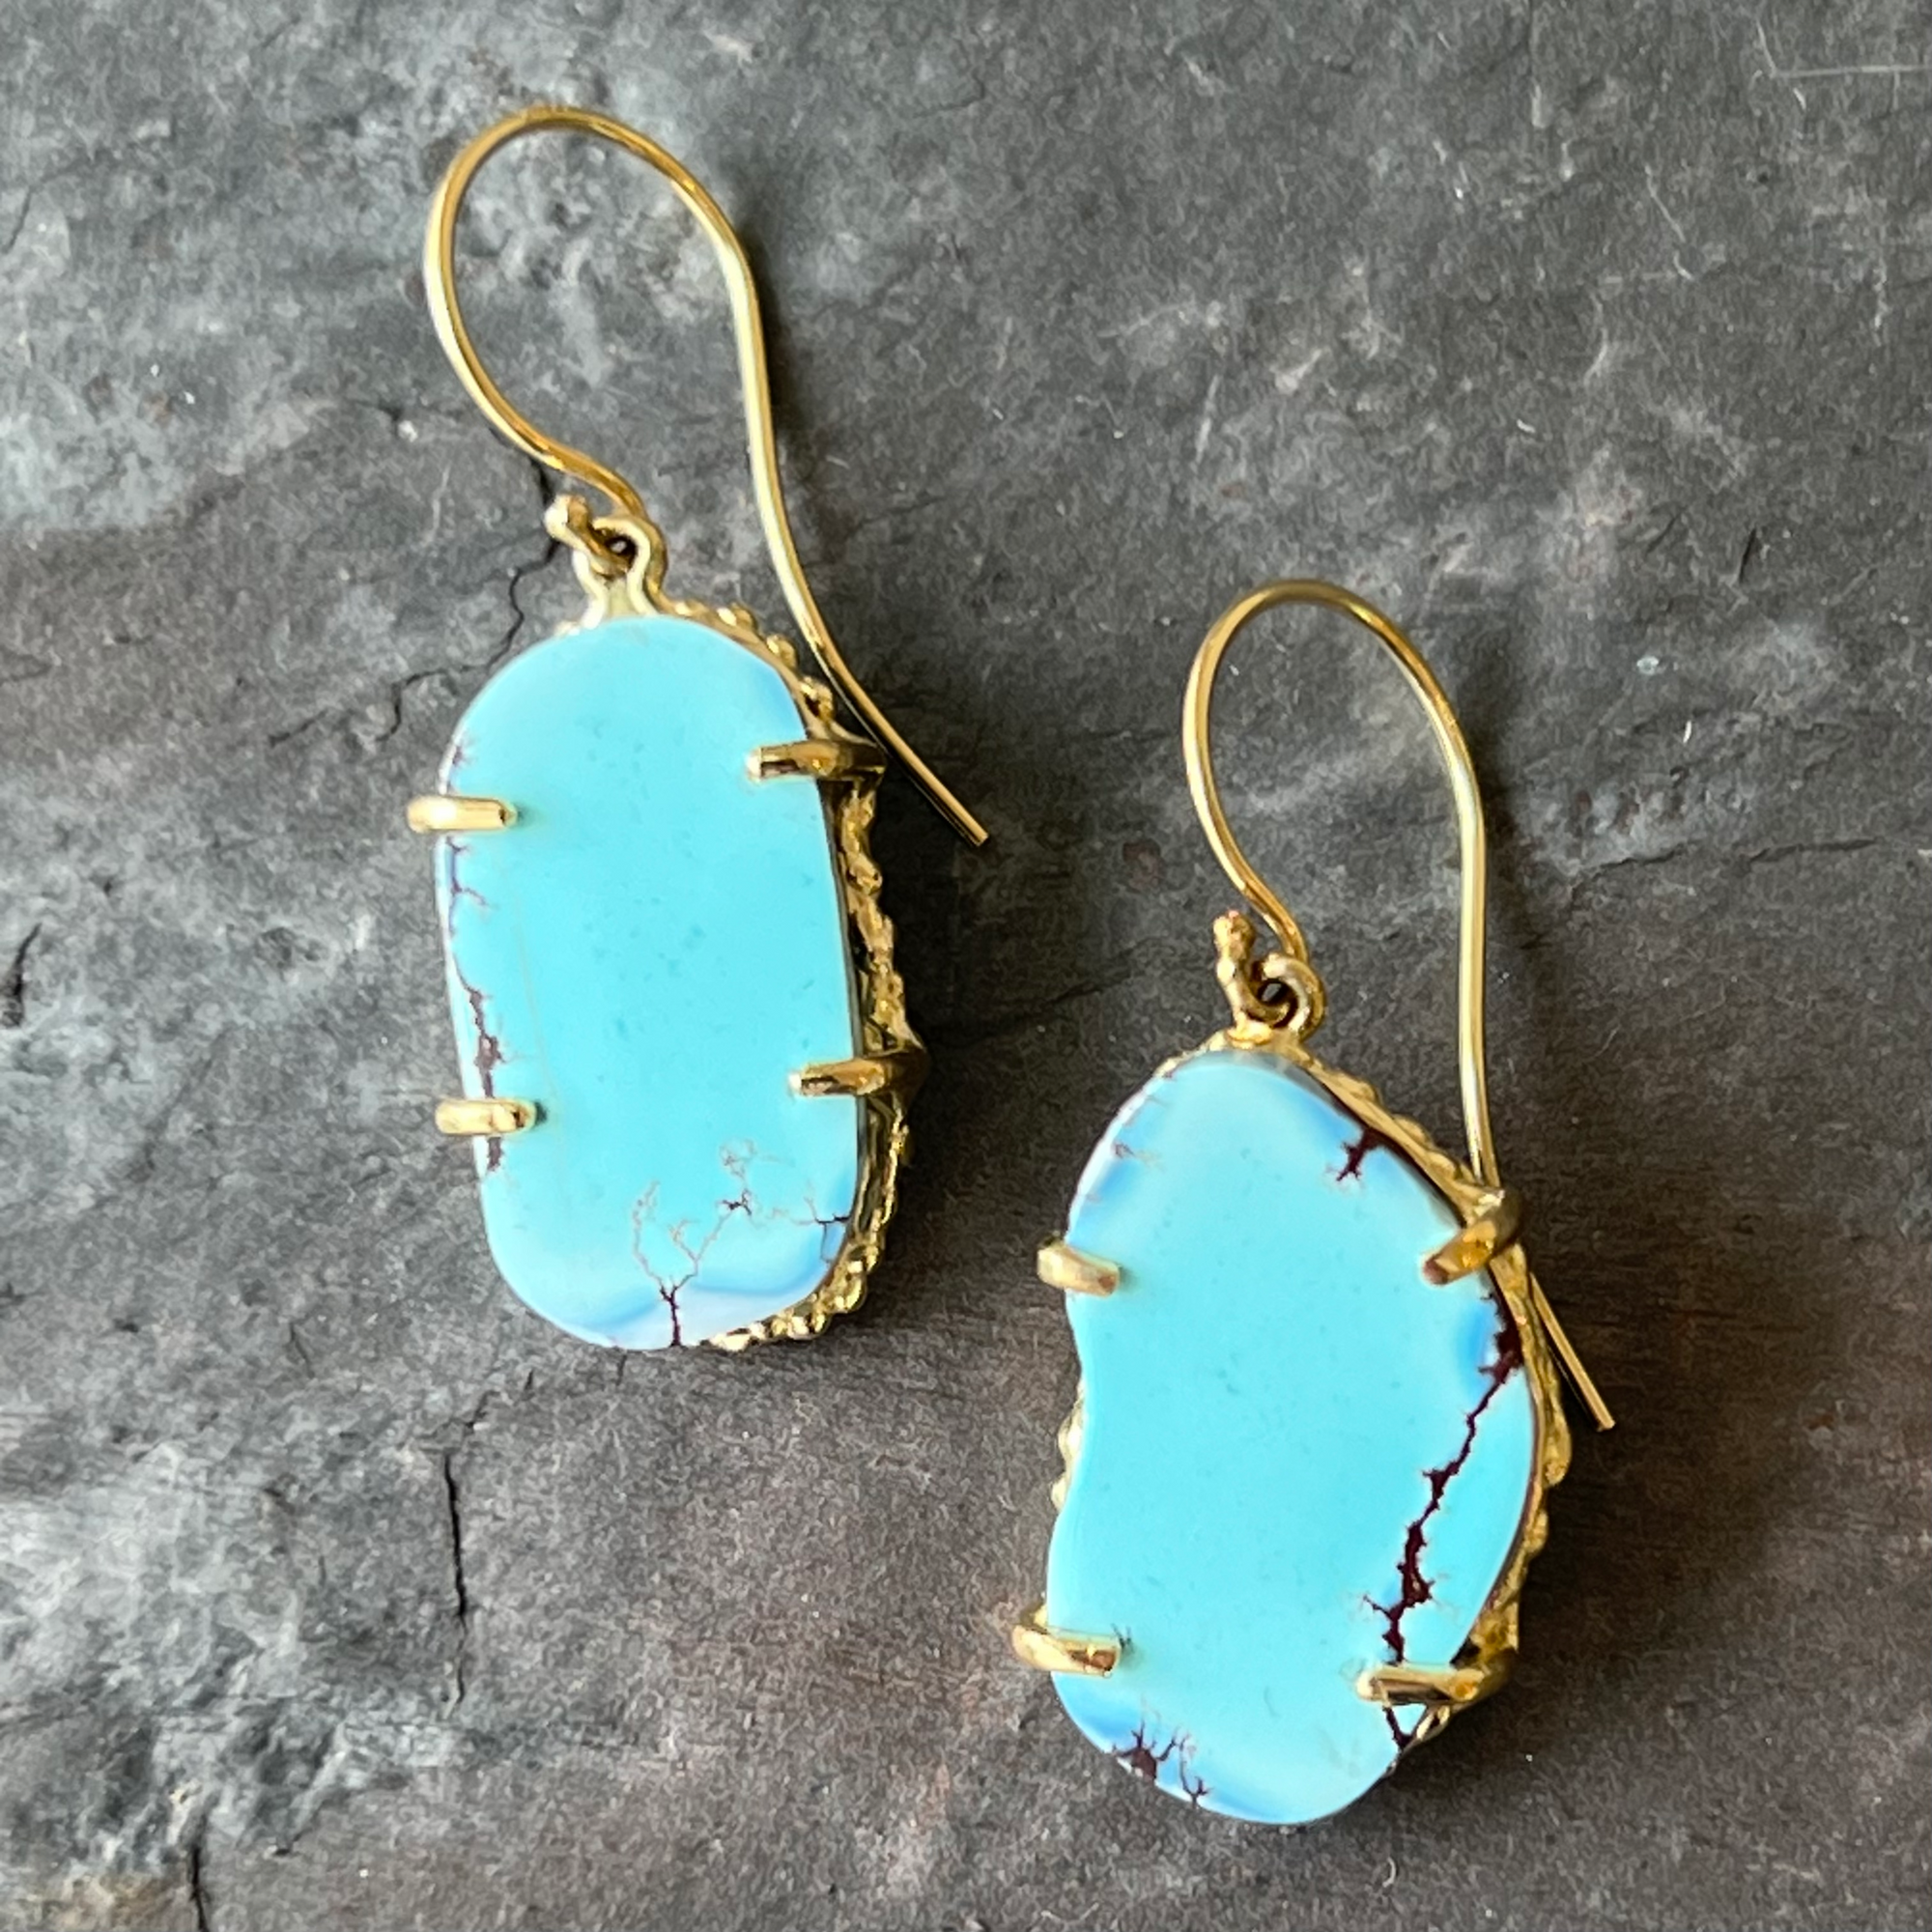 Lavender Turquoise Gold Earrings by Jane Bartel at Garden of Silver.